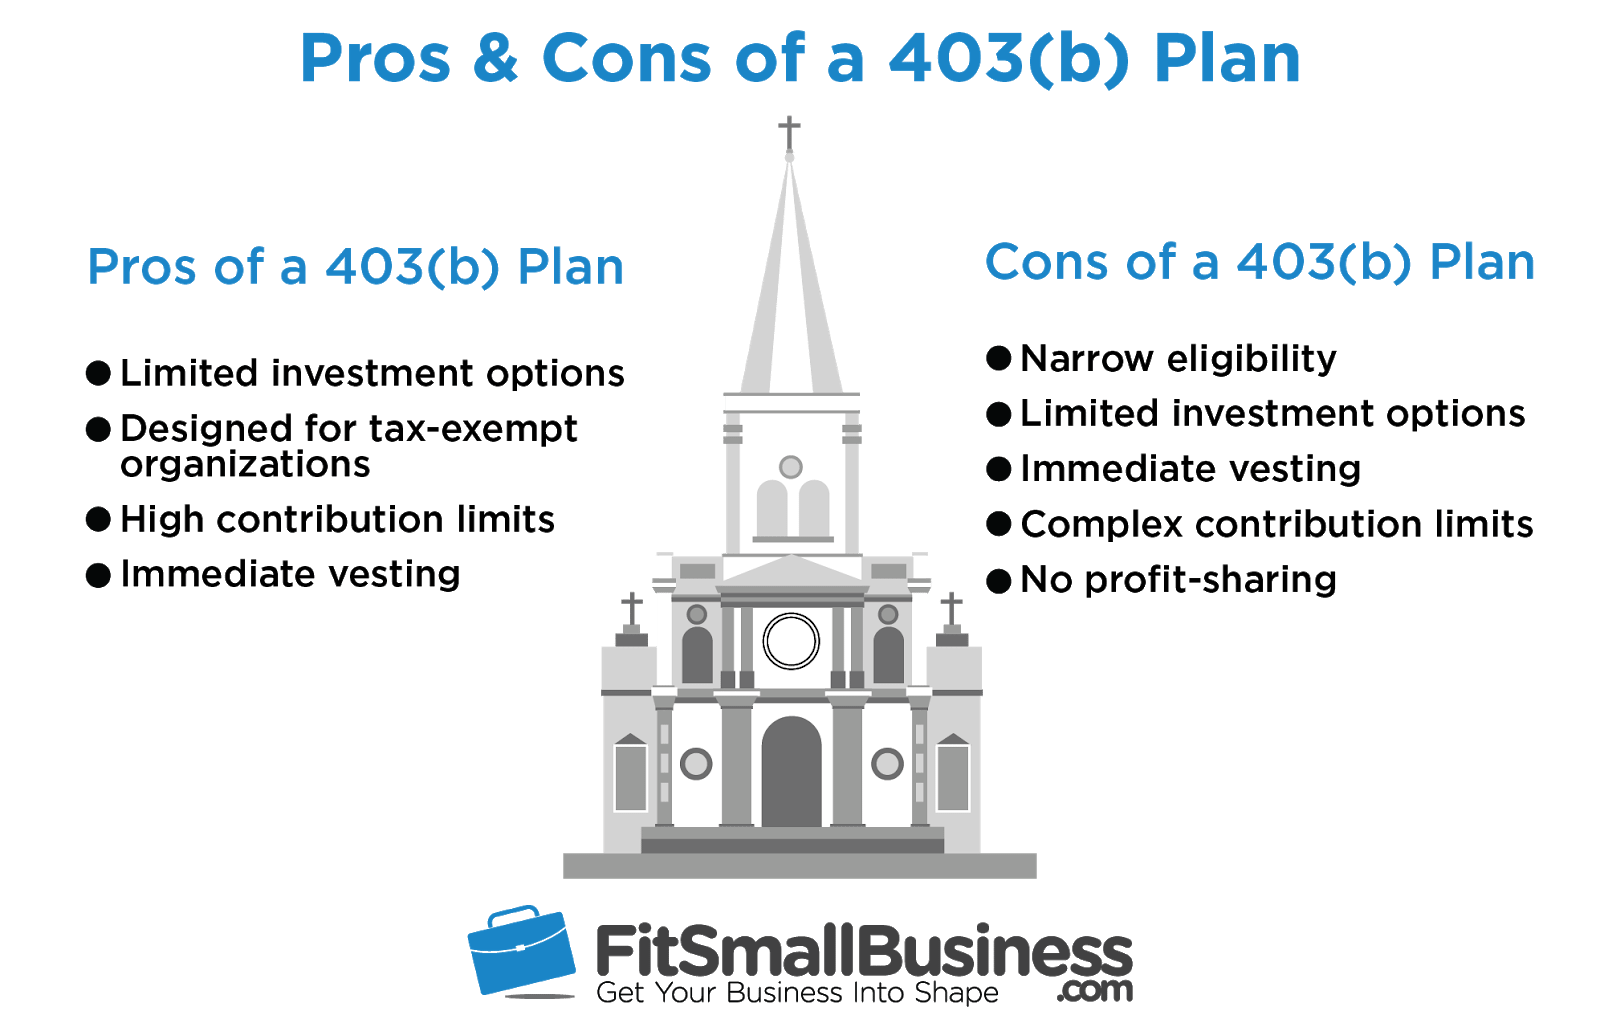 Pros and Cons of a 403(b) Plan